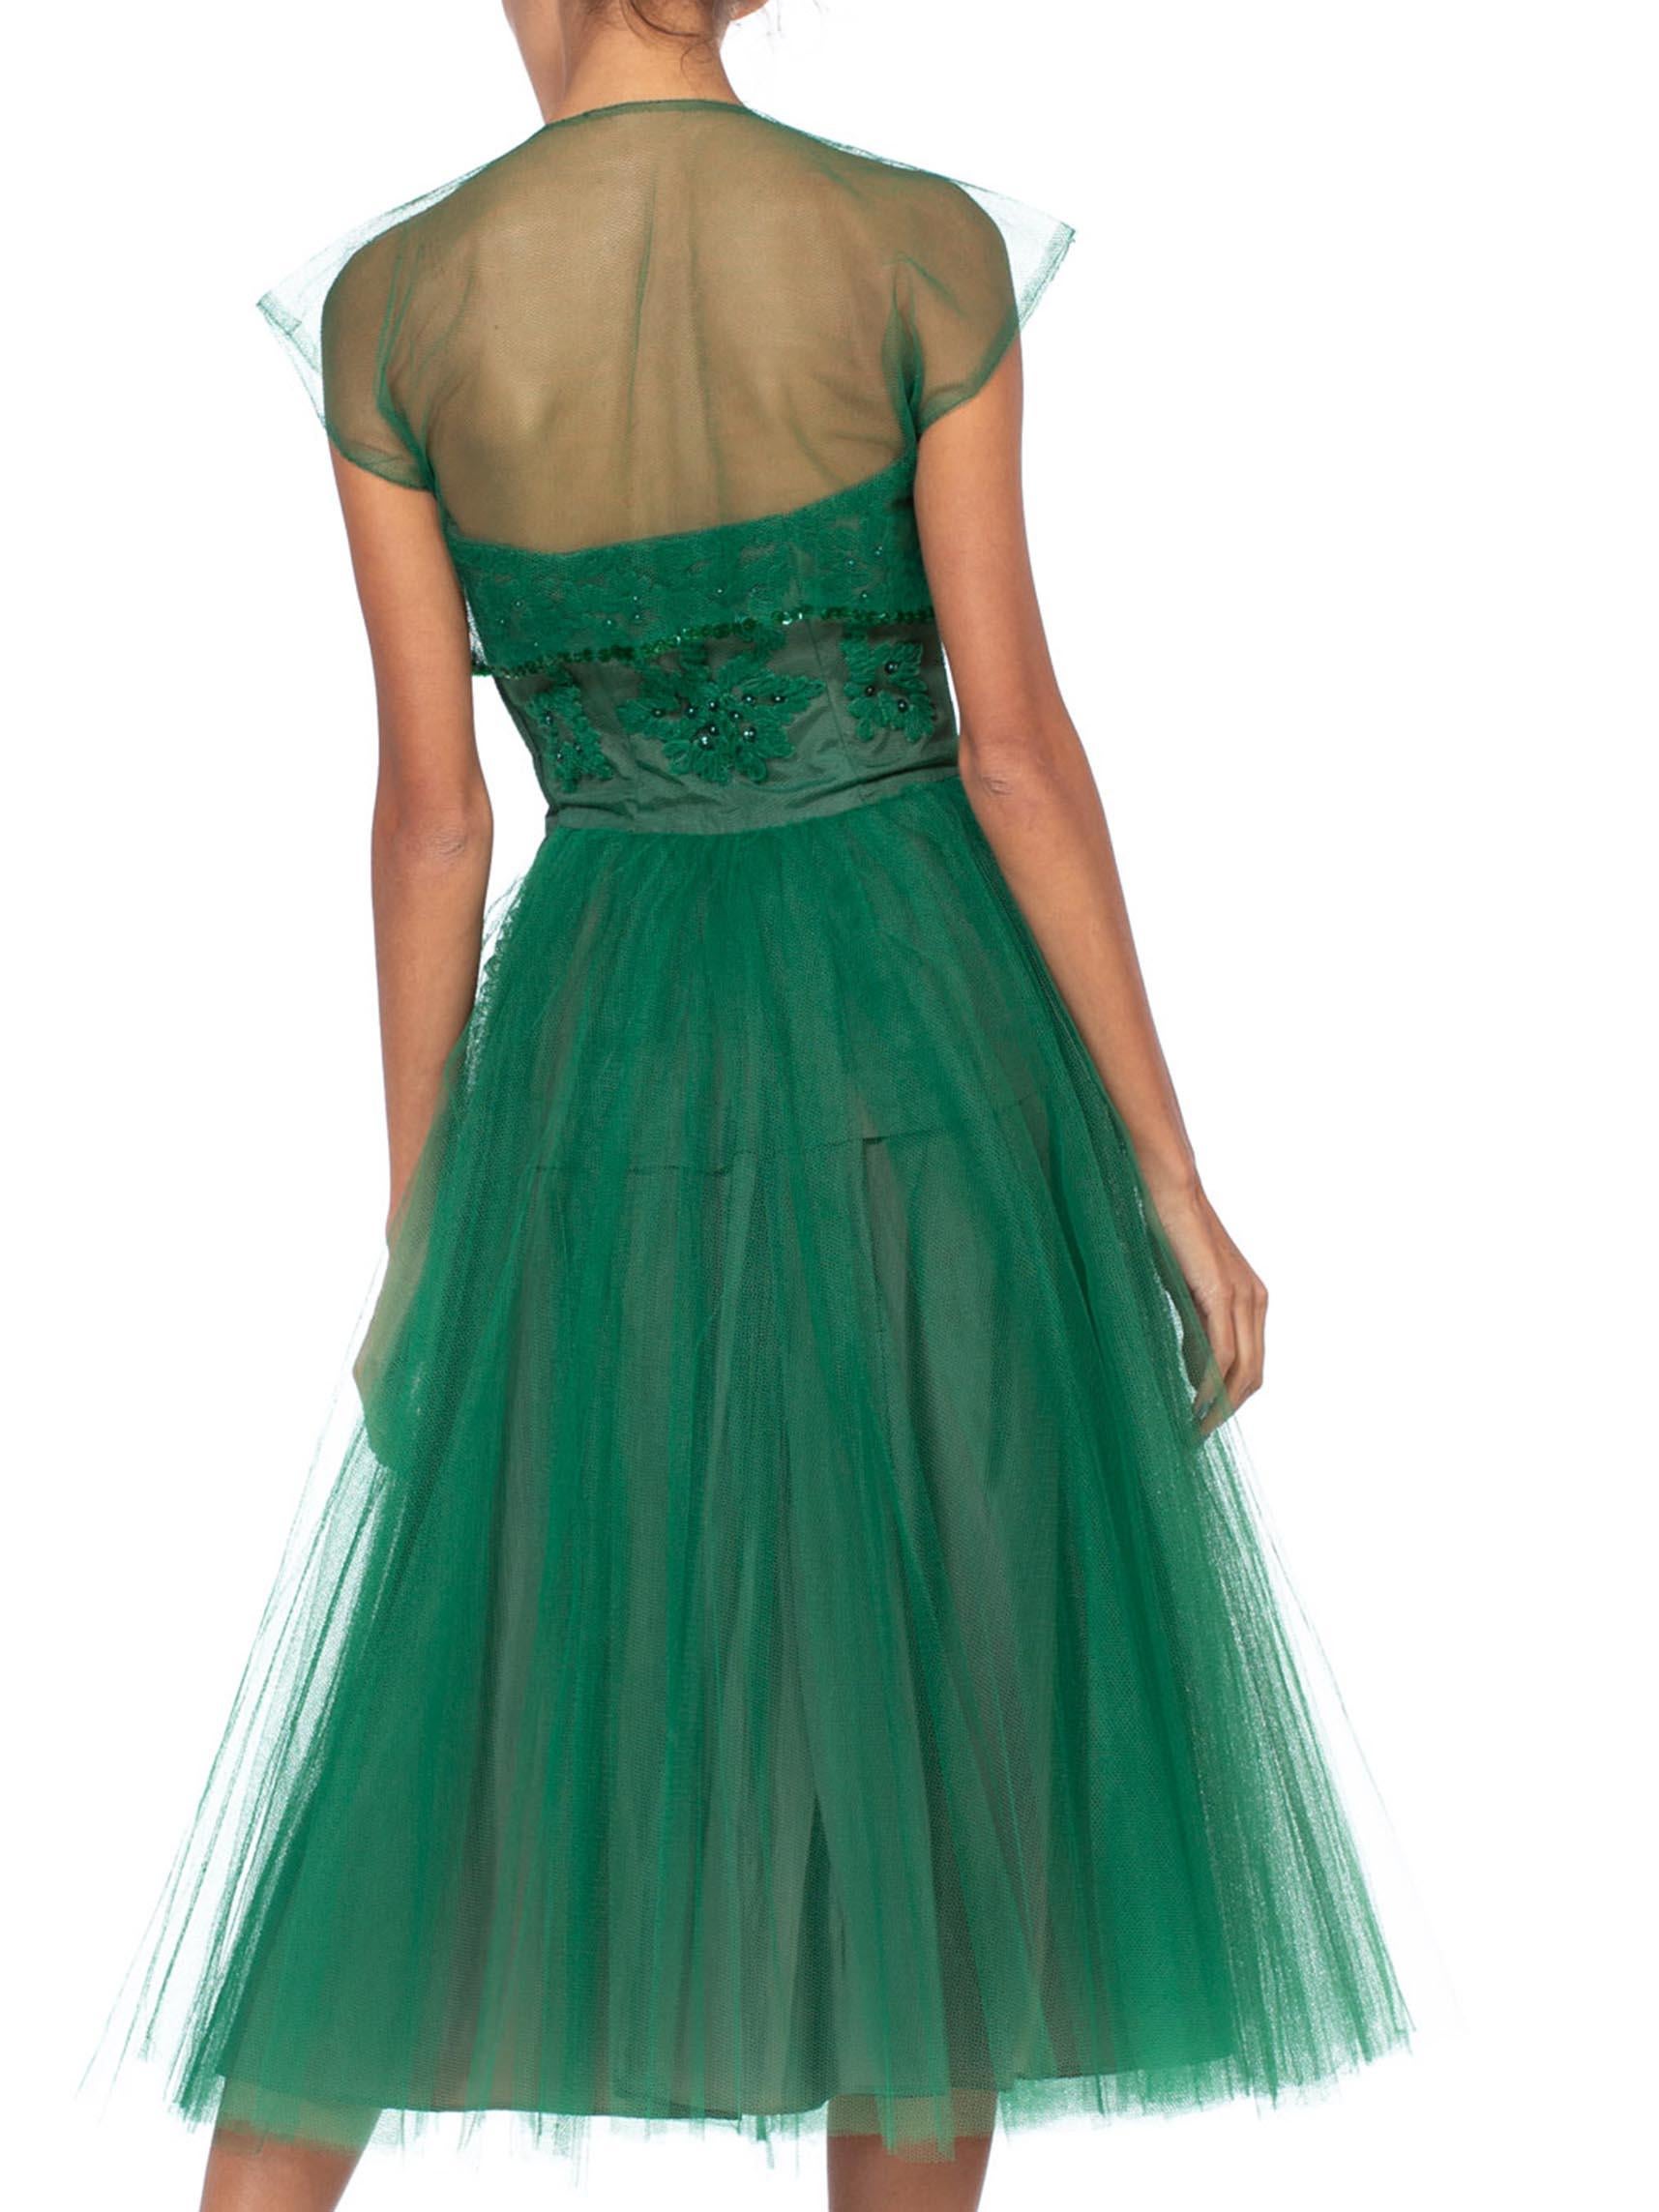 1950S Emerald Green Nylon Tulle Strapless Party Dress Appliquéd & Beaded With M For Sale 2